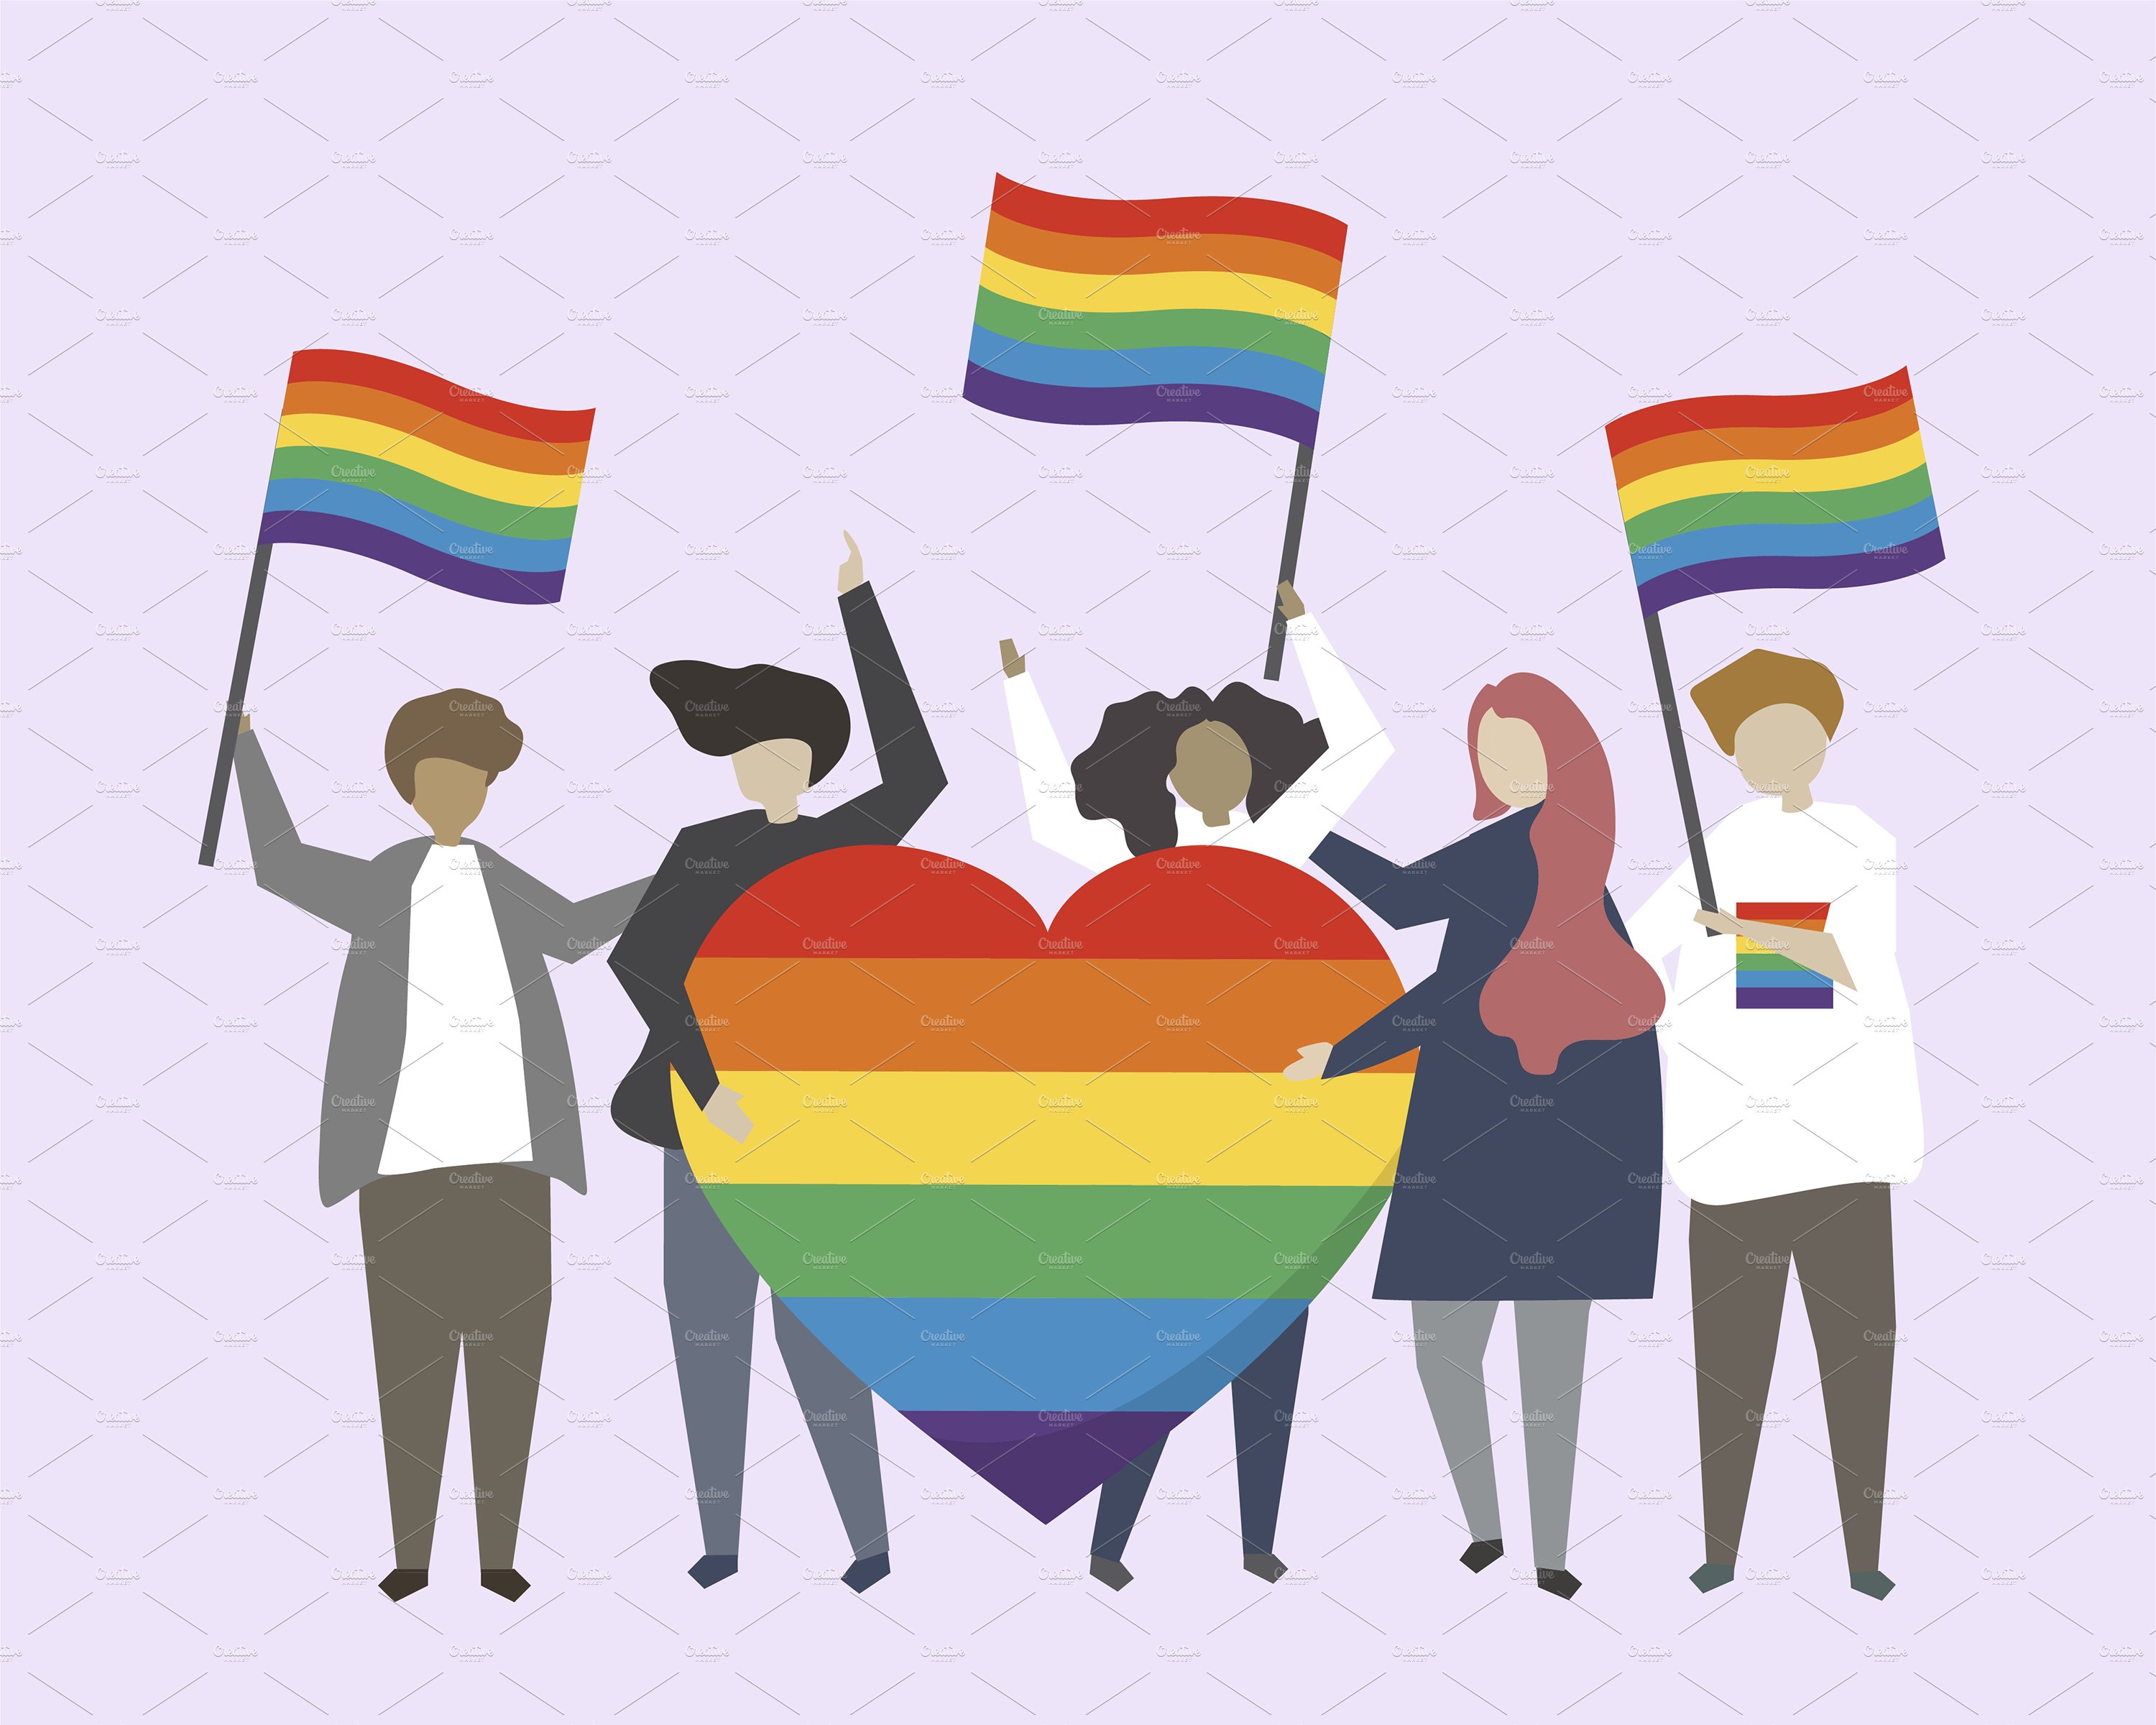 People with LGBTQ rainbow flags cover image.